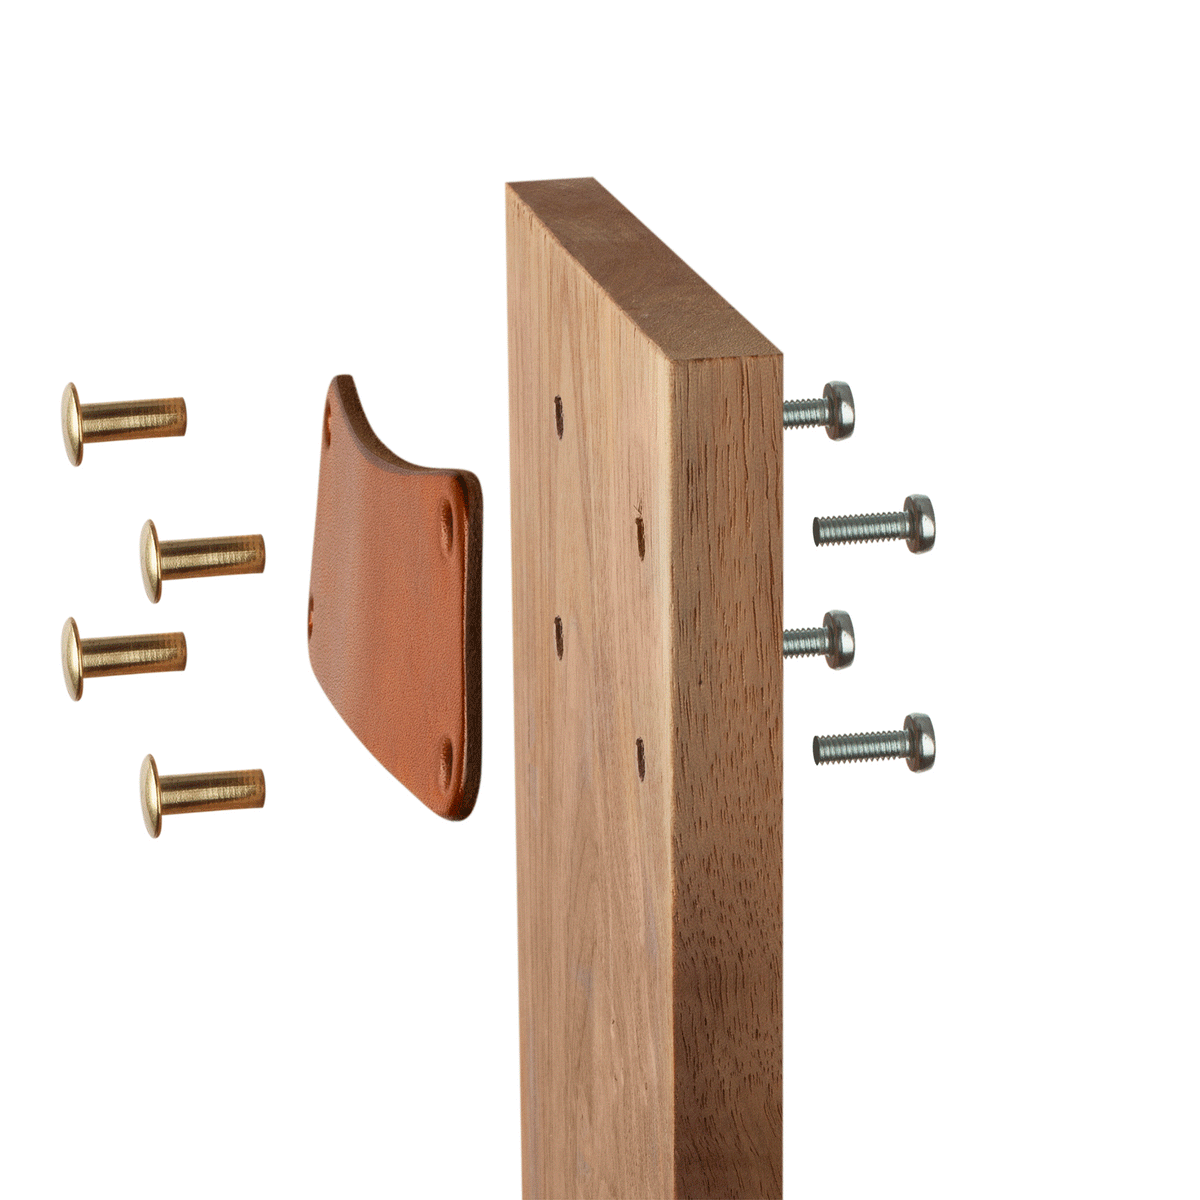 An &quot;exploded&quot; still image showing how the hardware is assembled for the bin pull using  surfaceless head Chicago screws in front of the drawer face and threaded back screws on the backside of the cabinet surface